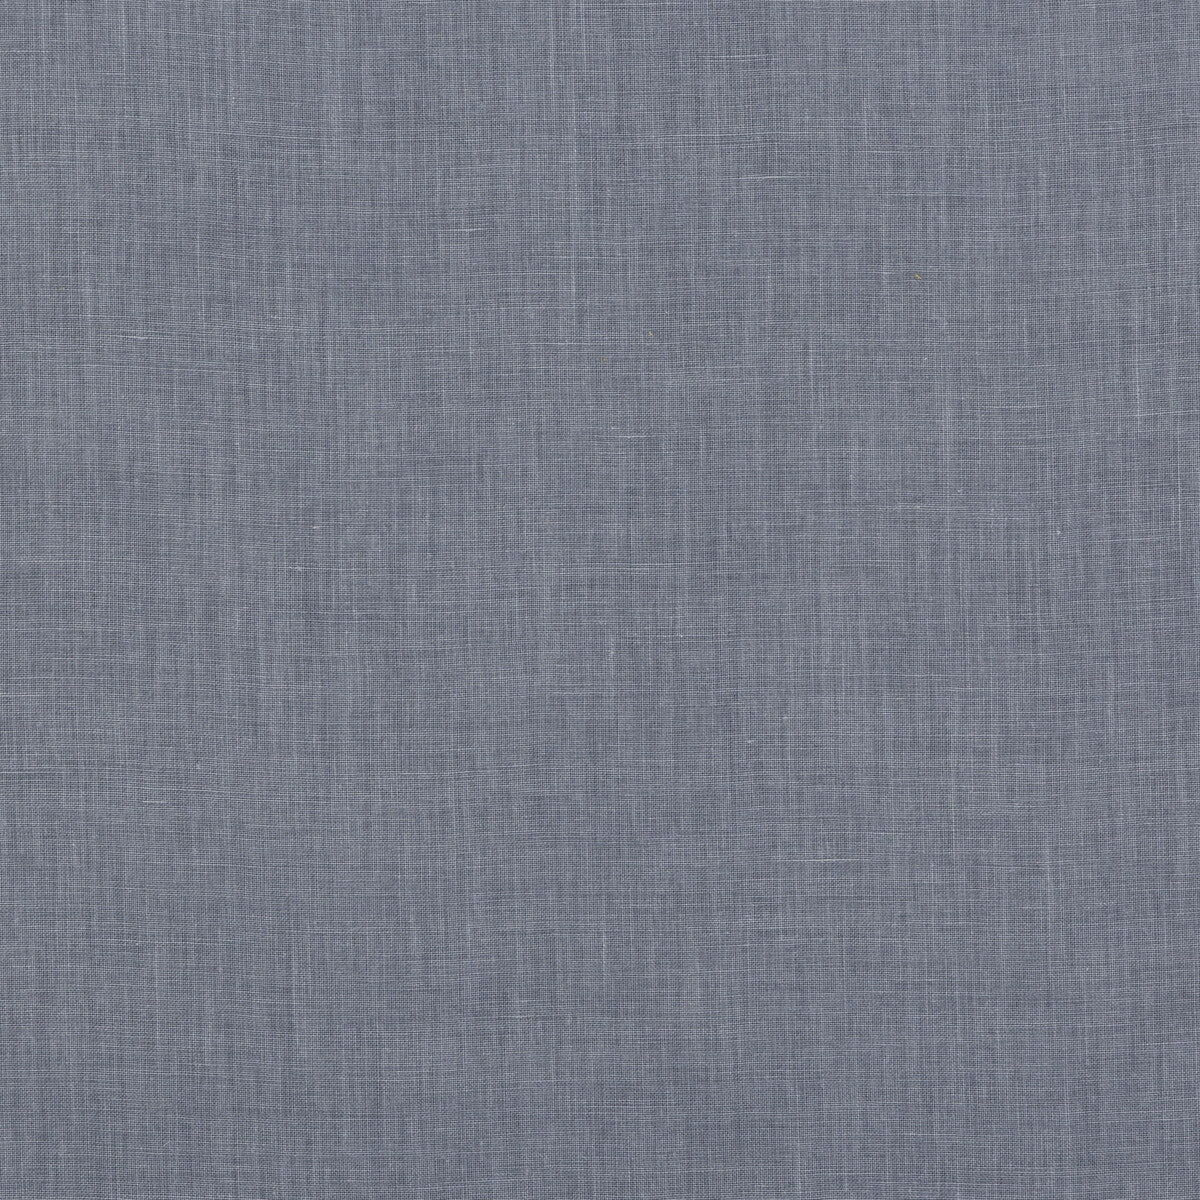 Kravet Basics fabric in 33767-515 color - pattern 33767.515.0 - by Kravet Basics in the Perfect Plains collection